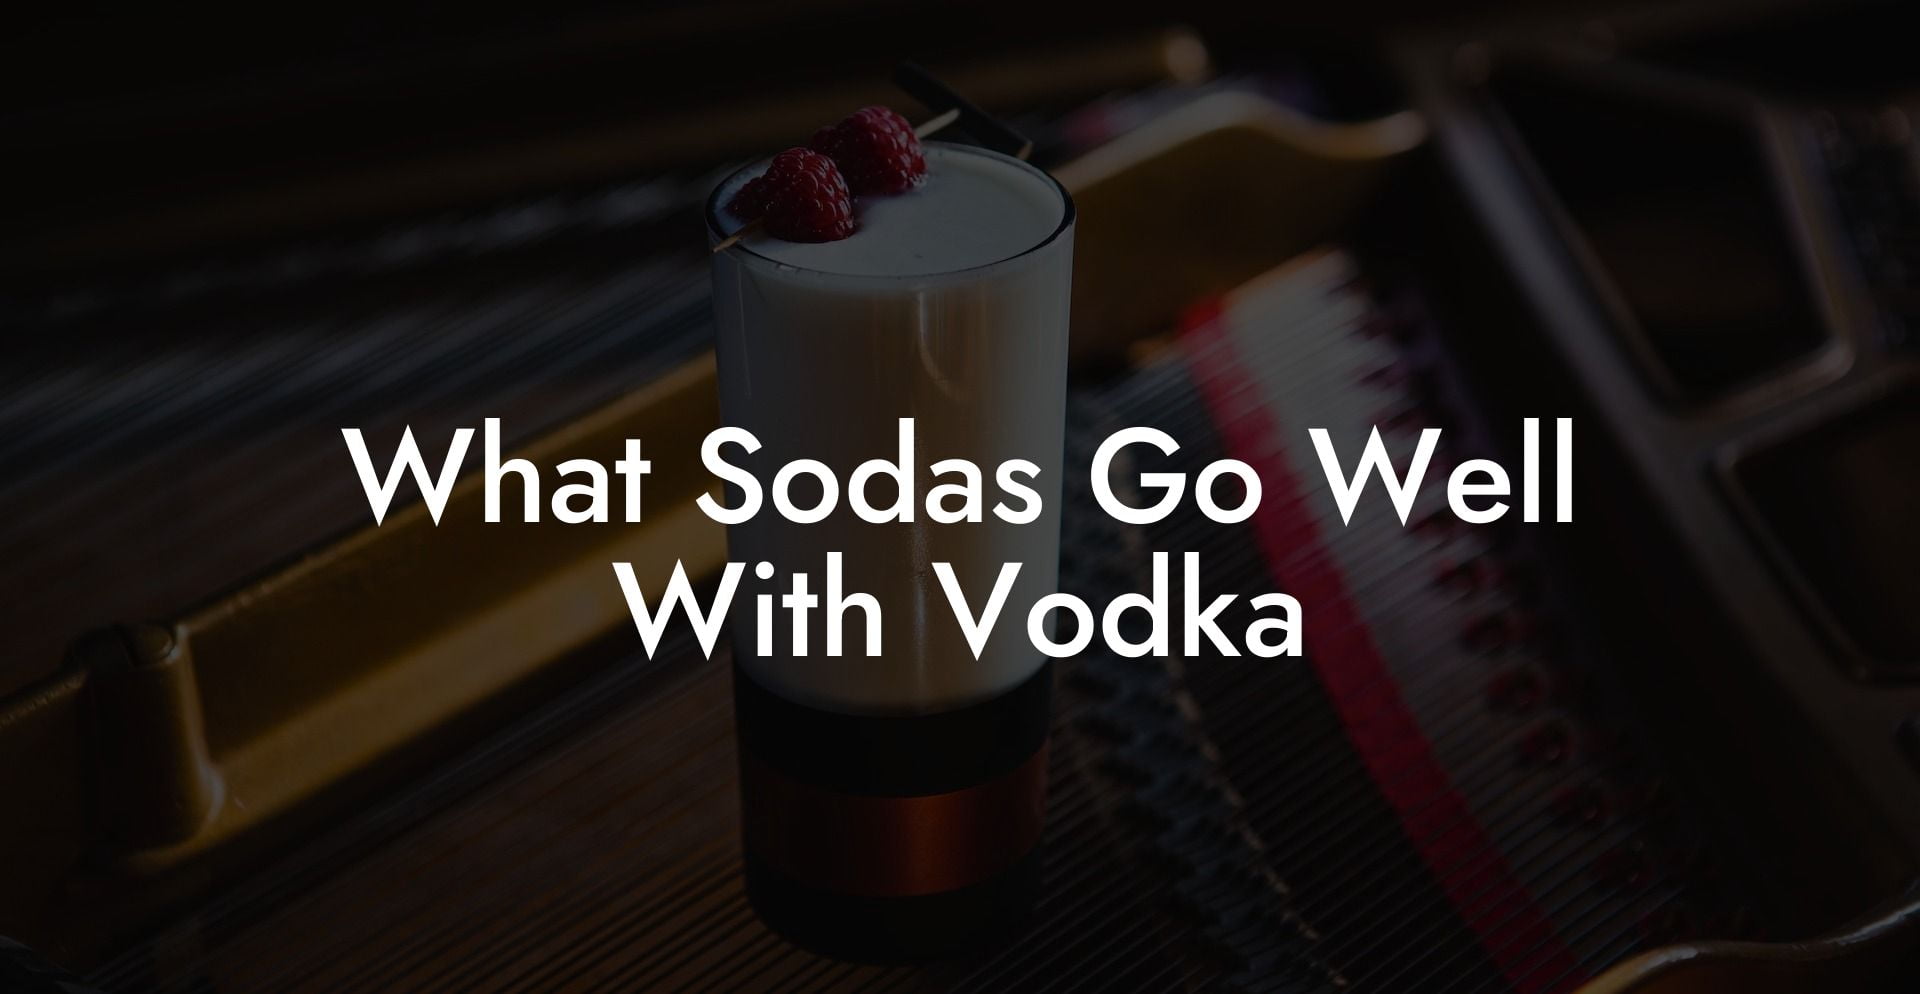 What Sodas Go Well With Vodka